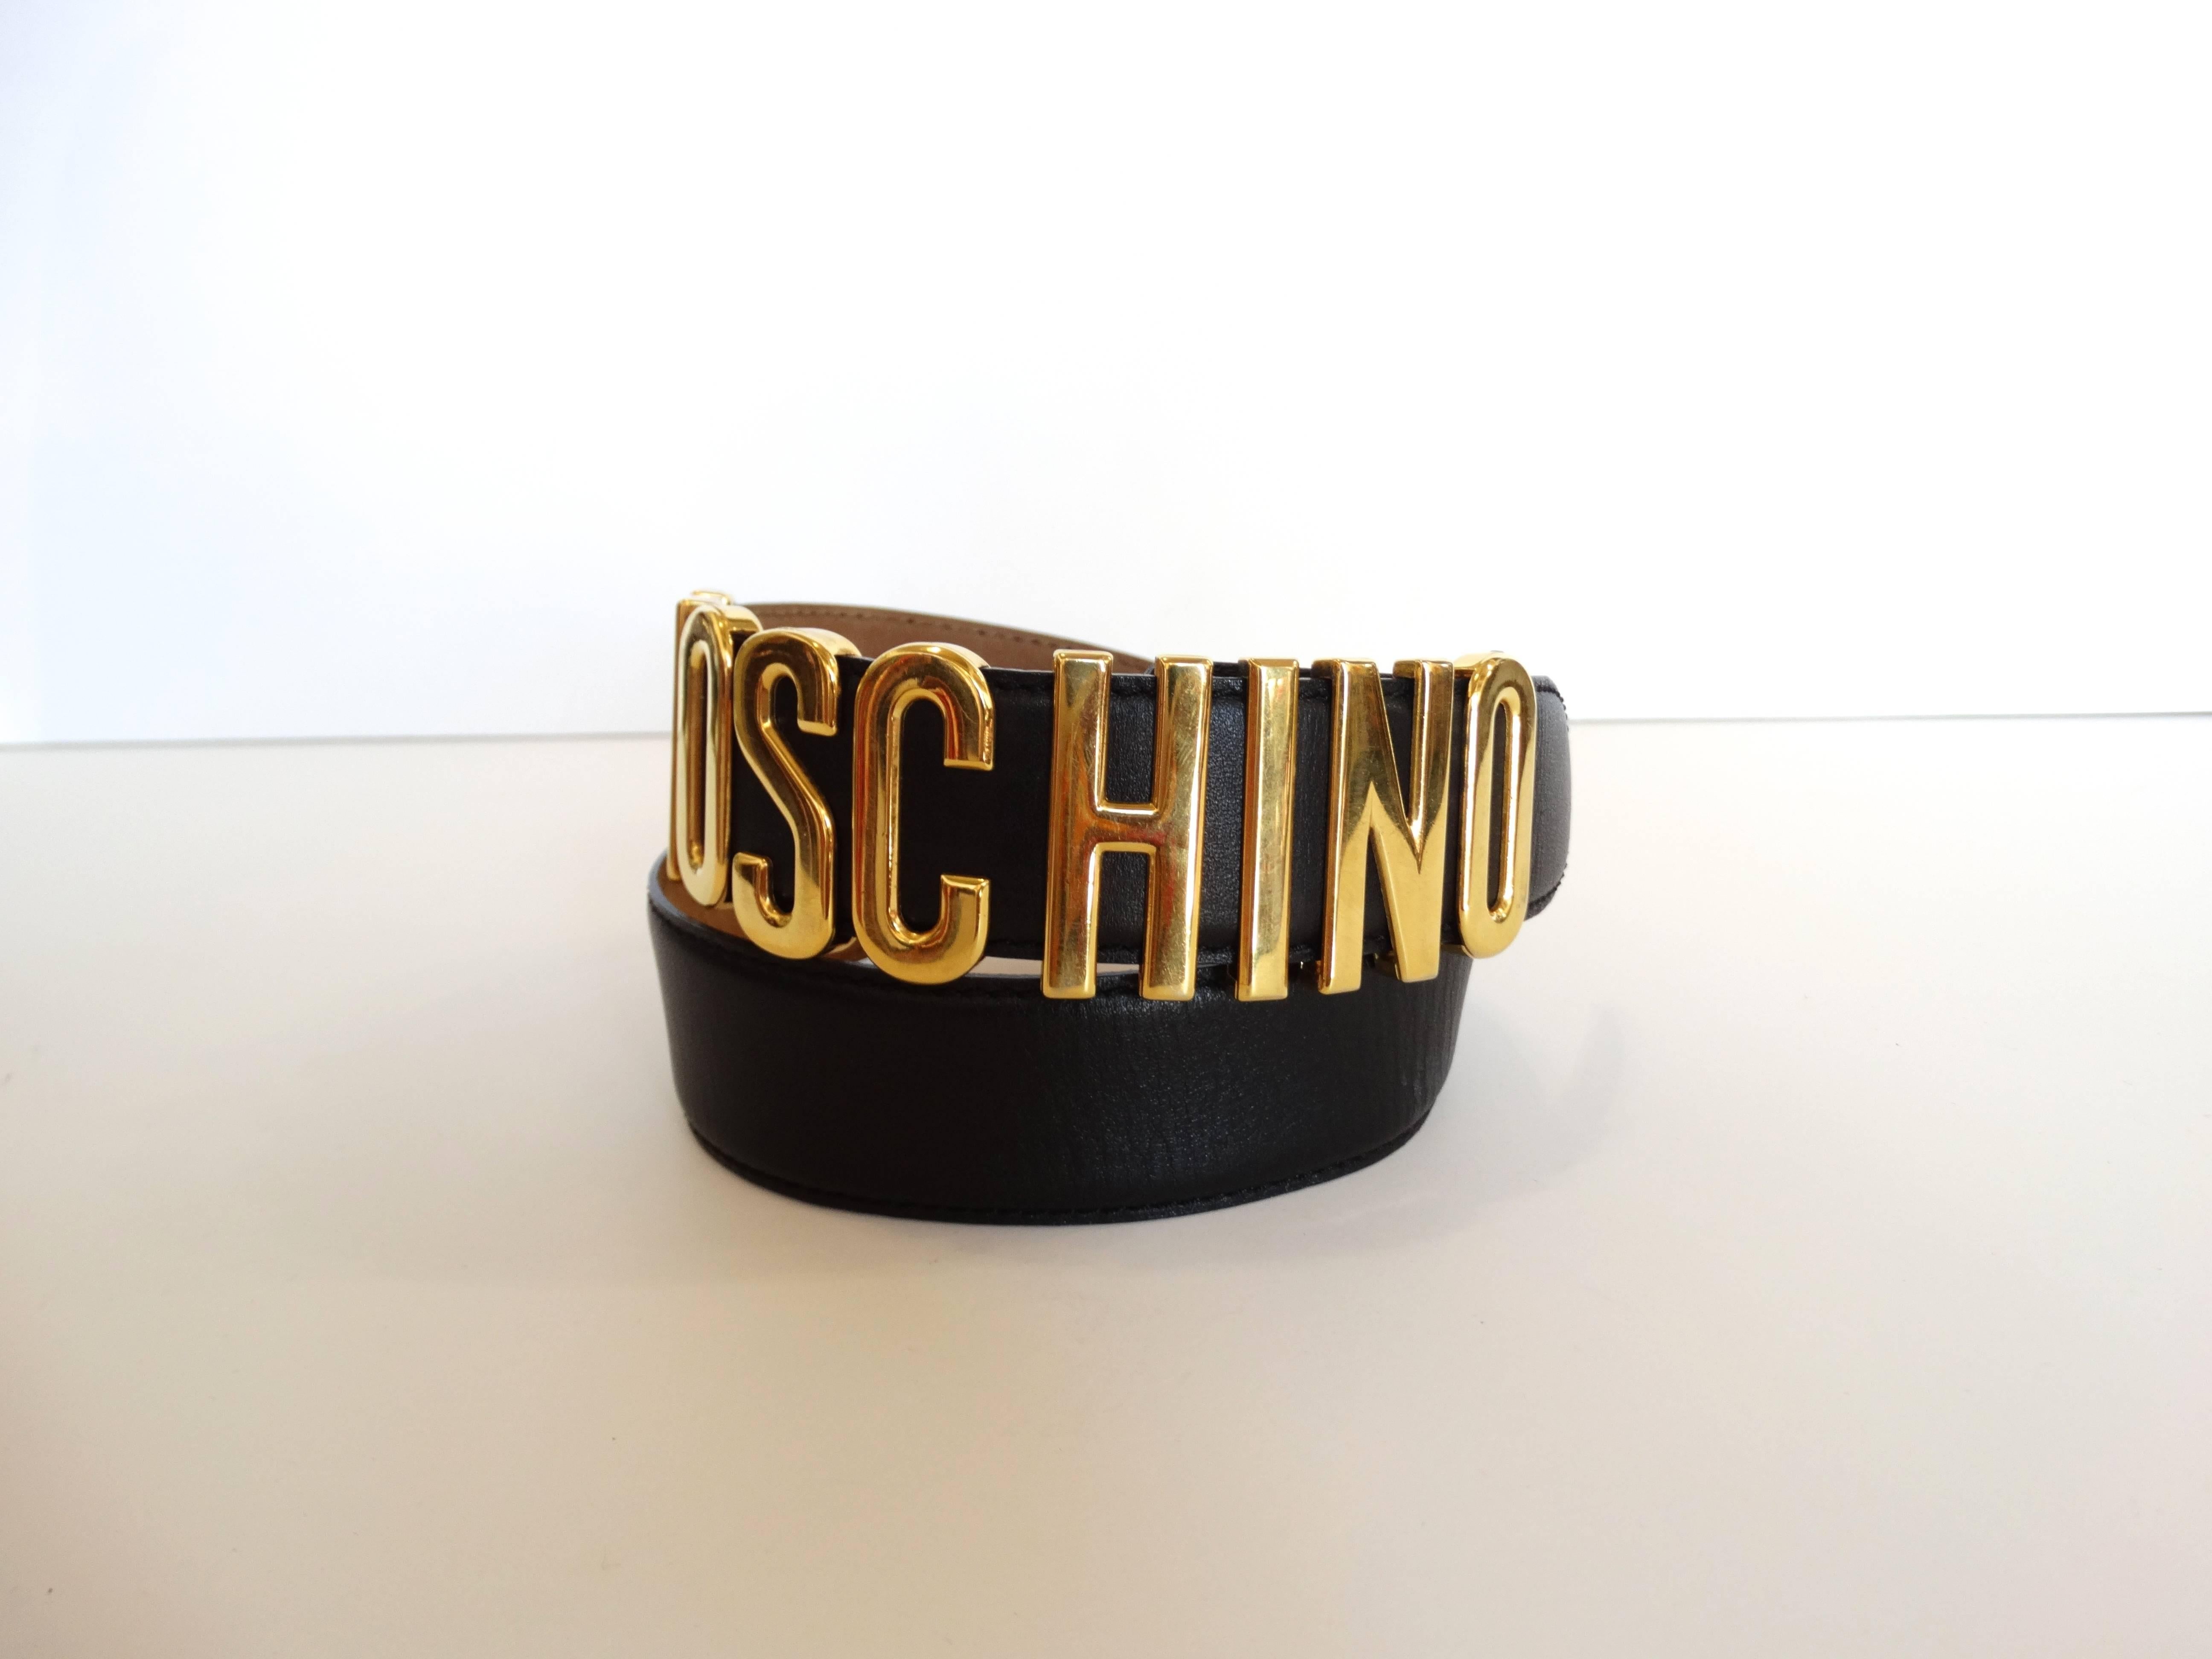 Moschino Letter Logo belt! “MOSCHINO” letters cast in brilliant gold metal. “M” and “O” are bolted down, the rest of the letters slide along the belt. Soft black italian leather belt. Three punched holes with double hook closure. 

Marked: 38
Total